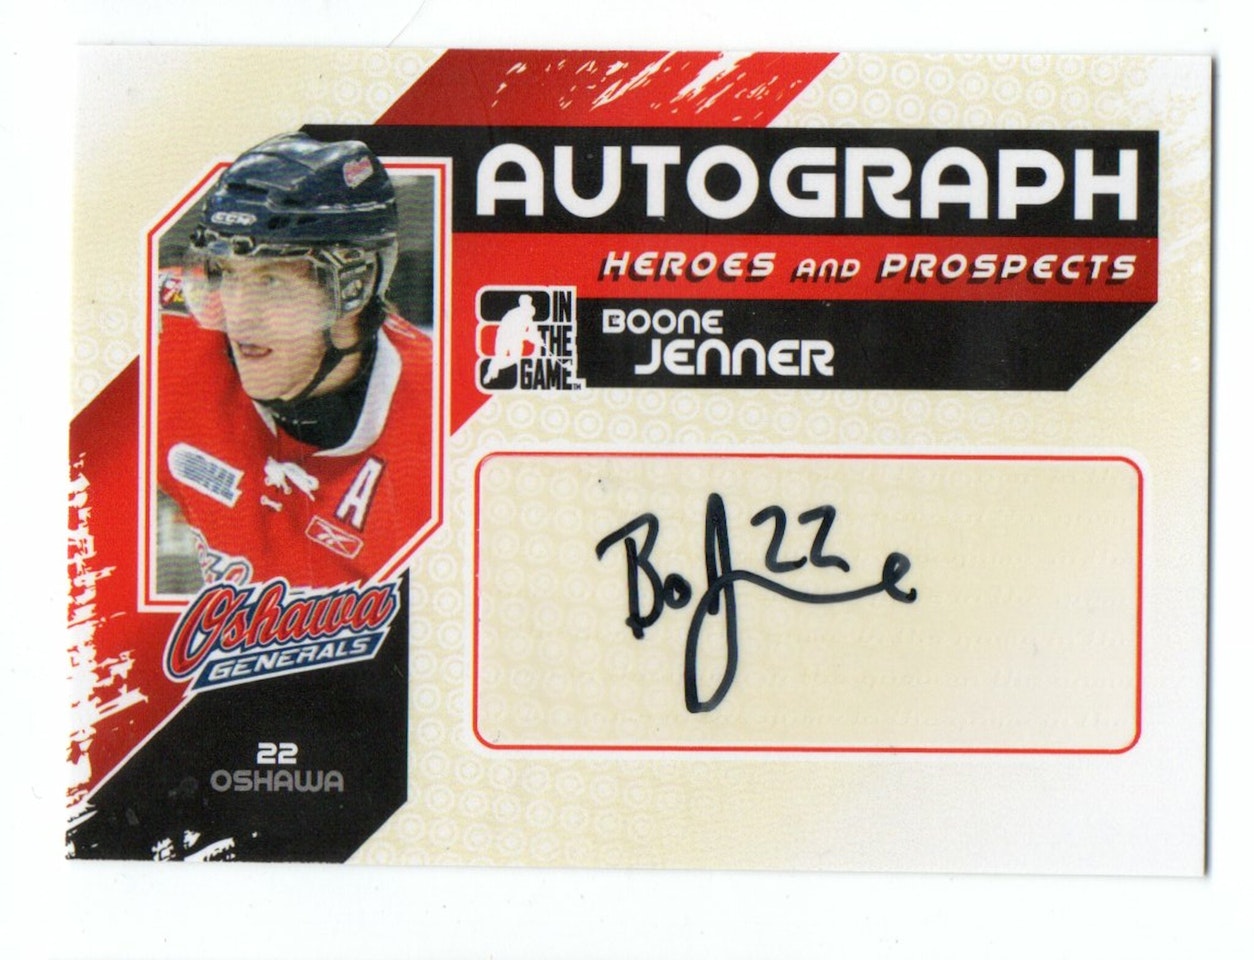 2010-11 ITG Heroes and Prospects Autographs #ABJ Boone Jenner (40-189x2-BLUEJACKETS)